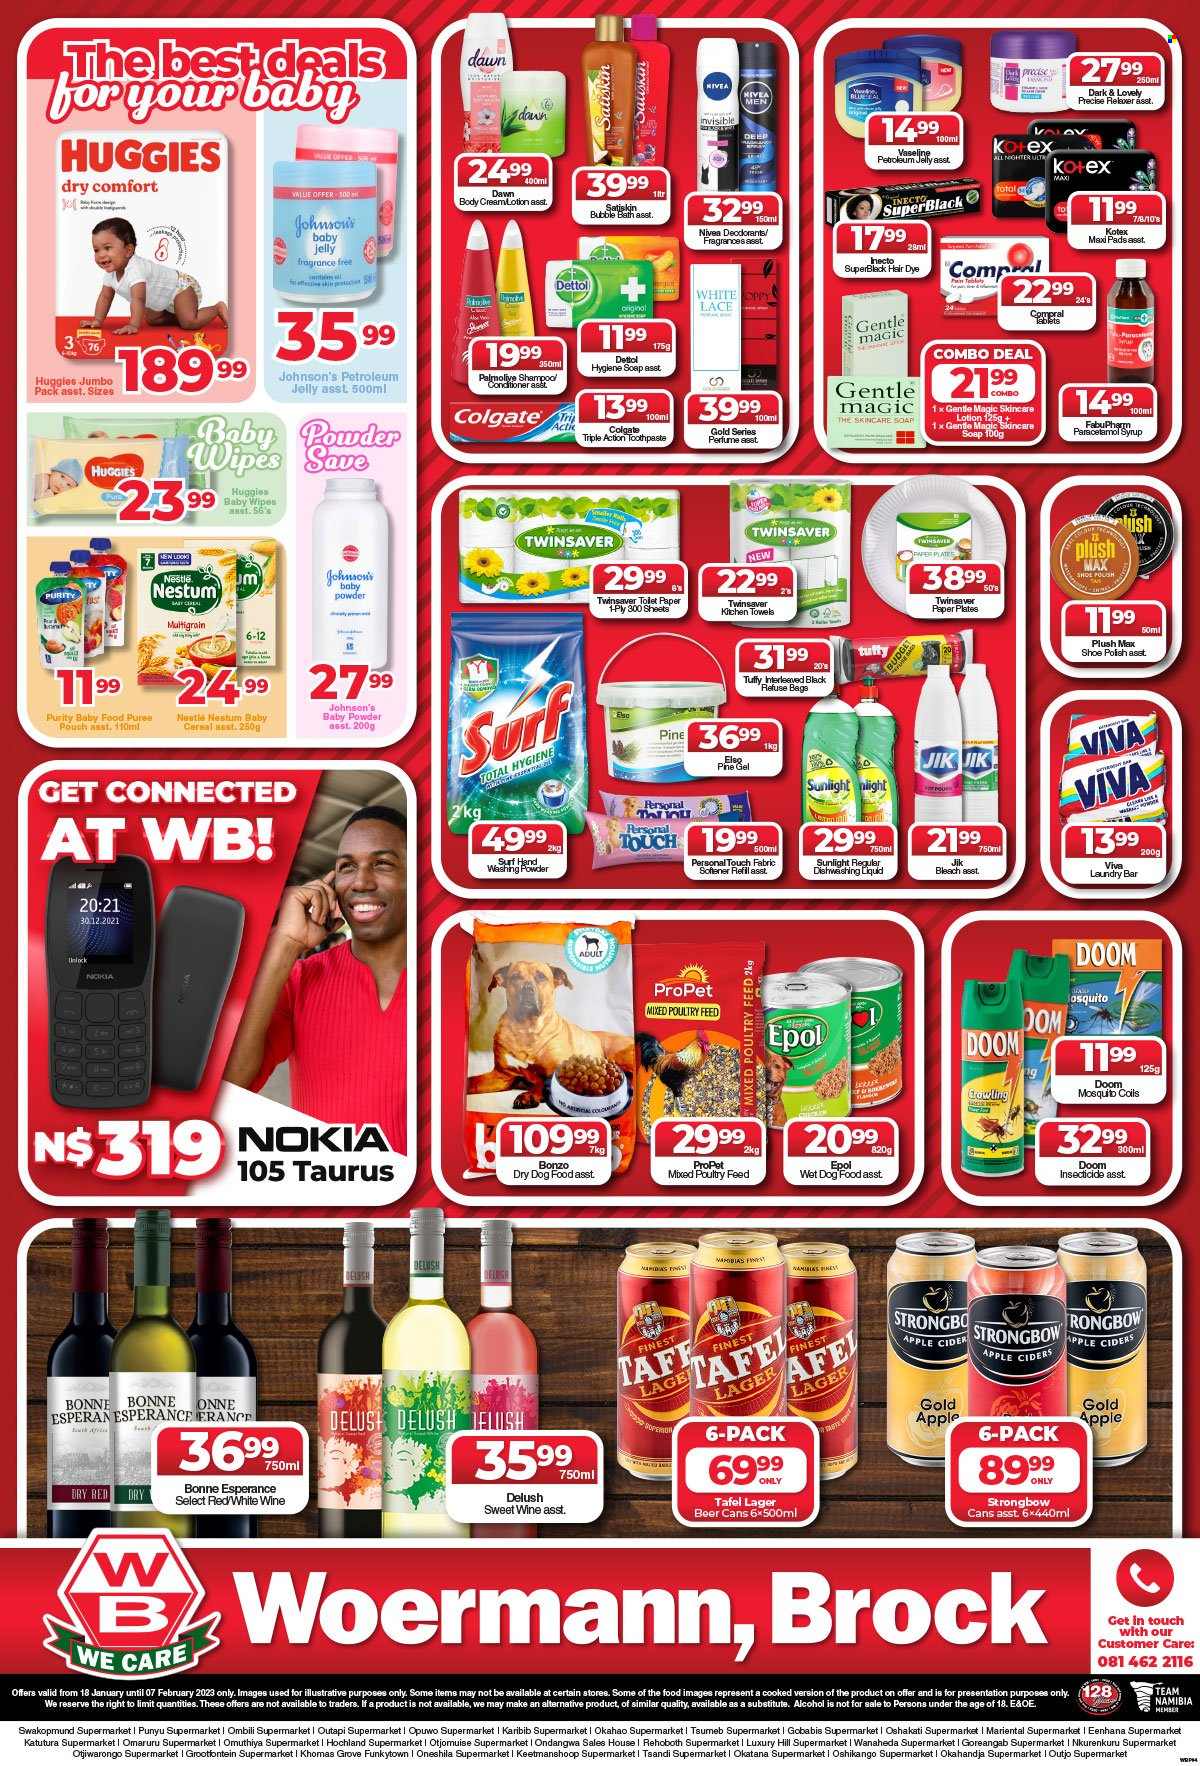 thumbnail - Woermann Brock catalogue  - 18/01/2023 - 07/02/2023 - Sales products - Nestlé, cereals, syrup, white wine, wine, alcohol, apple cider, cider, beer, Lager, Strongbow, Purity, wipes, Huggies, baby wipes, Johnson's, toilet paper, kitchen towels, Dettol, bleach, fabric softener, laundry powder, Sunlight, Surf, dishwashing liquid, bubble bath, shampoo, Nivea, Palmolive, Vaseline, Satiskin, soap, Colgate, toothpaste, Kotex, petroleum jelly, Gentle Magic, conditioner, relaxer, body lotion, eau de parfum, deodorant, animal food, dog food, wet dog food, dry dog food. Page 4.